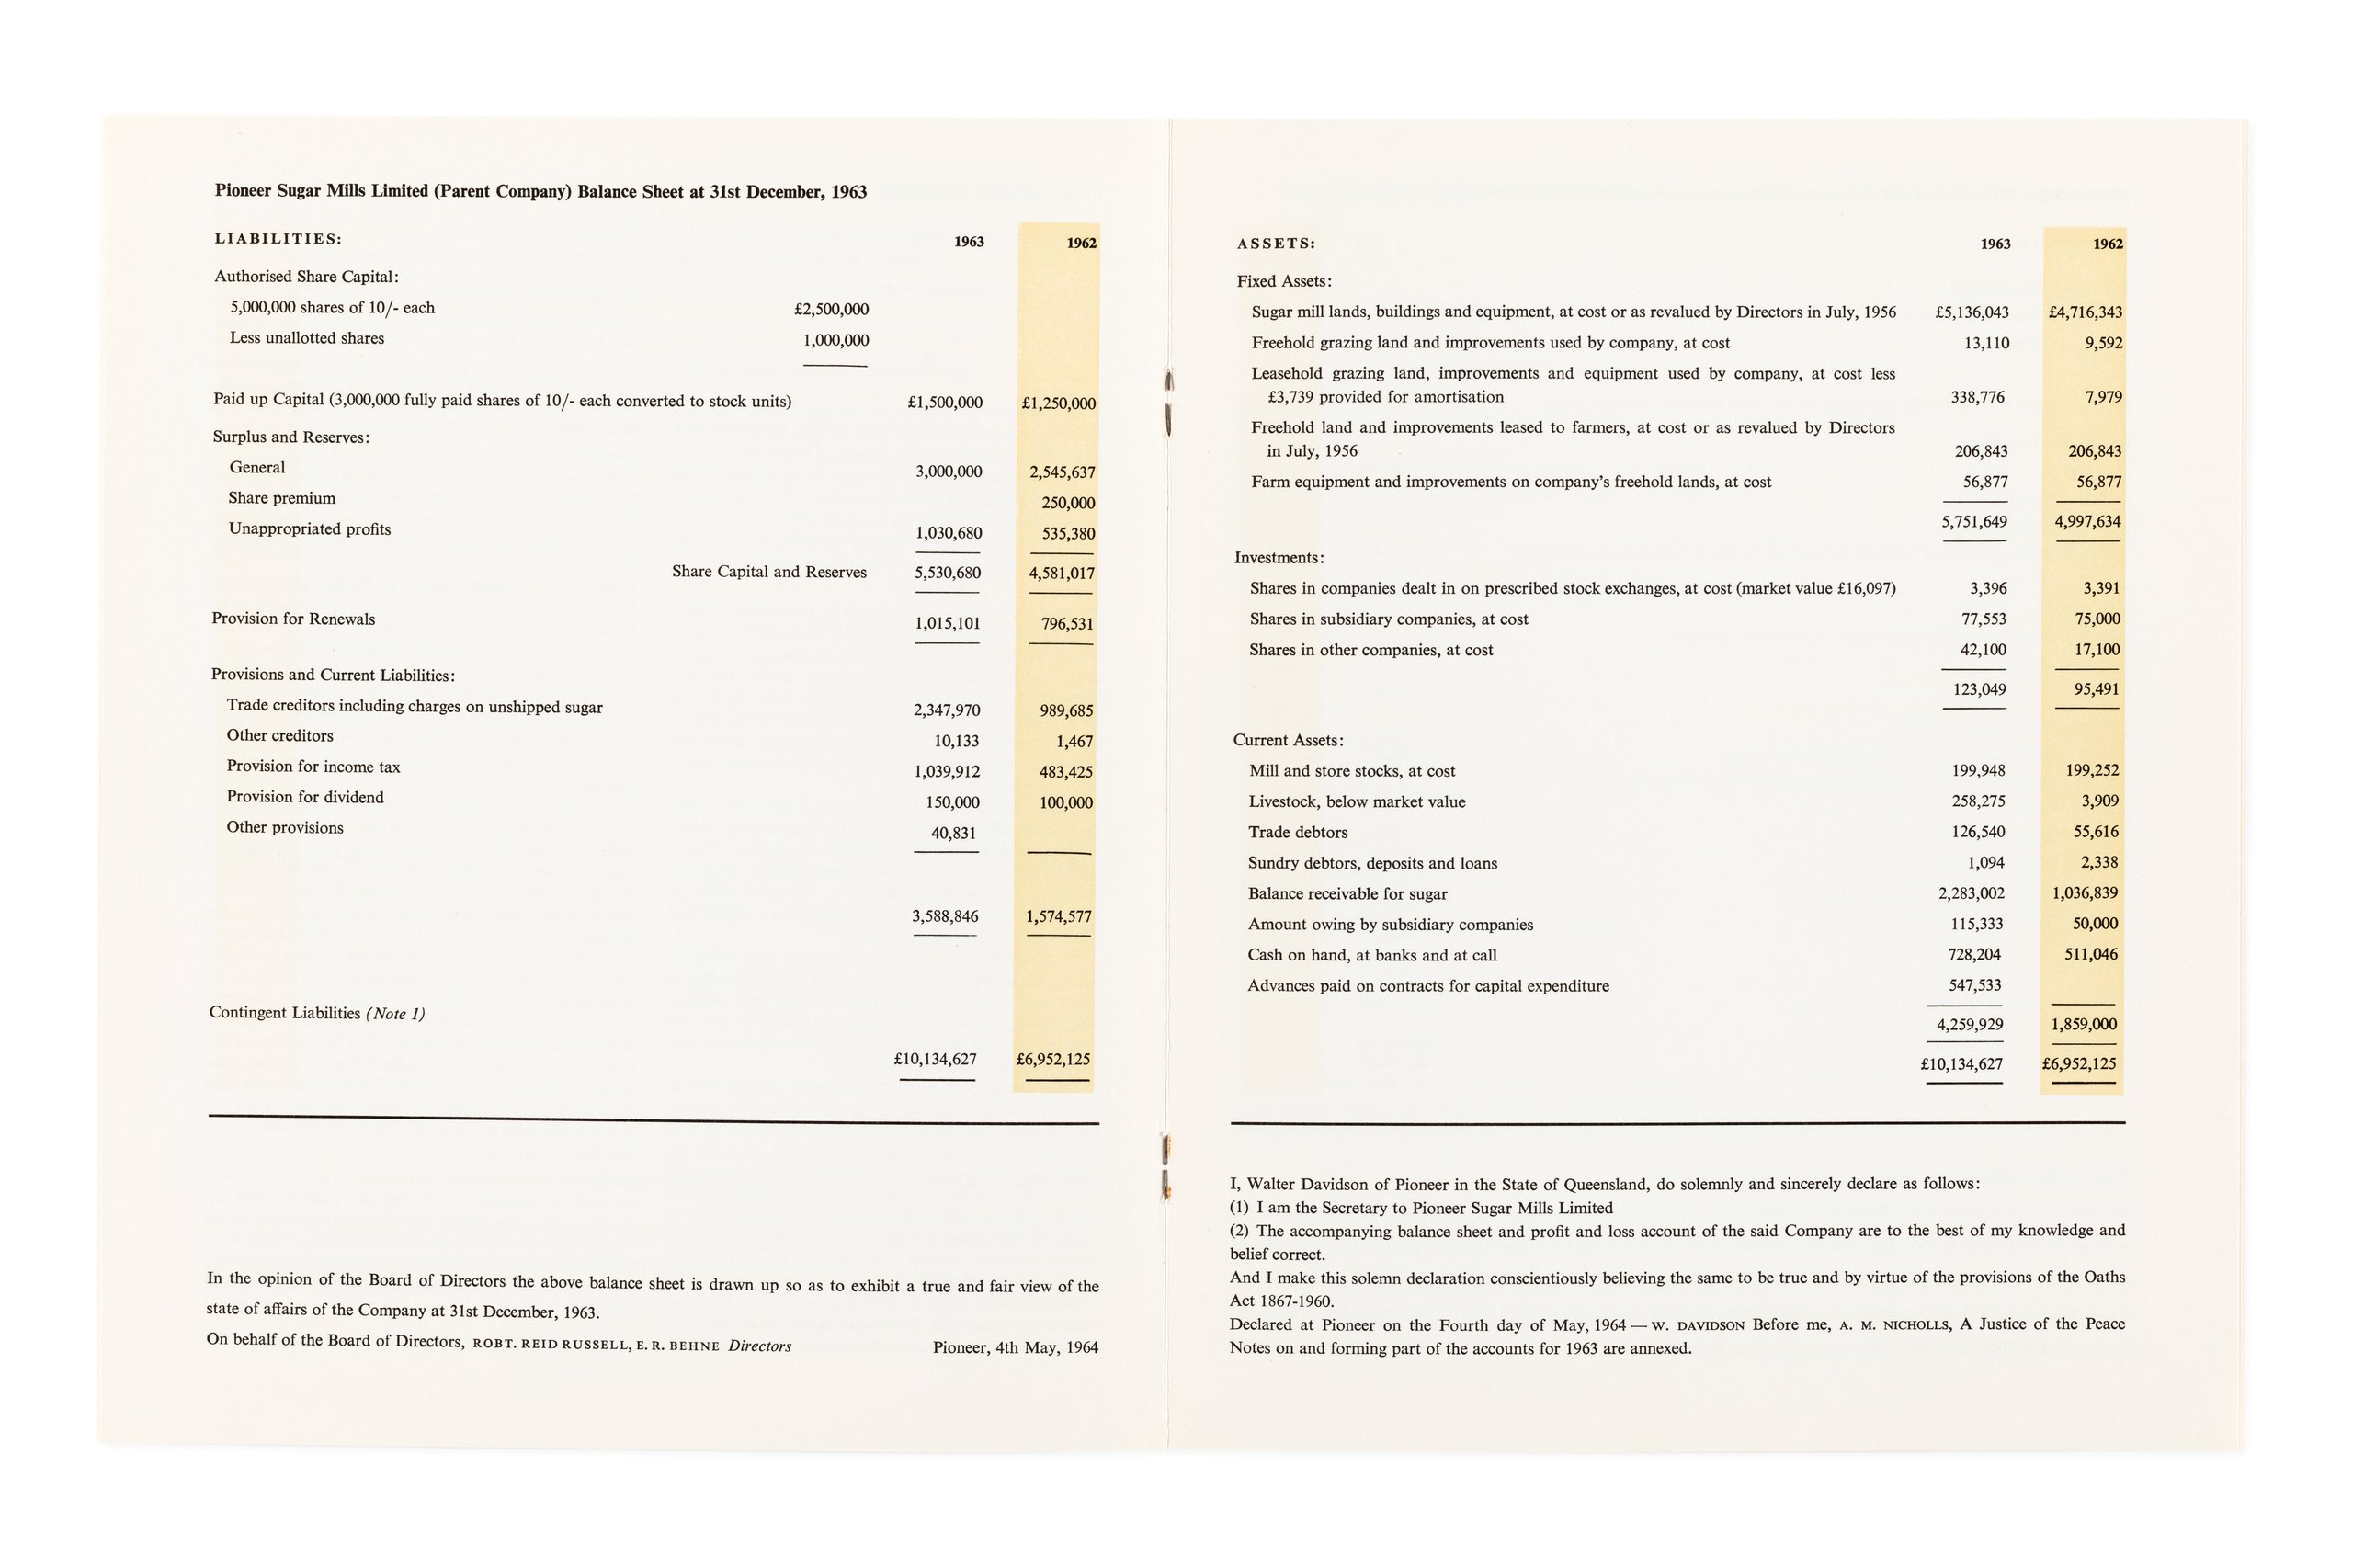 Pioneer Sugar Mills annual reports and stationery